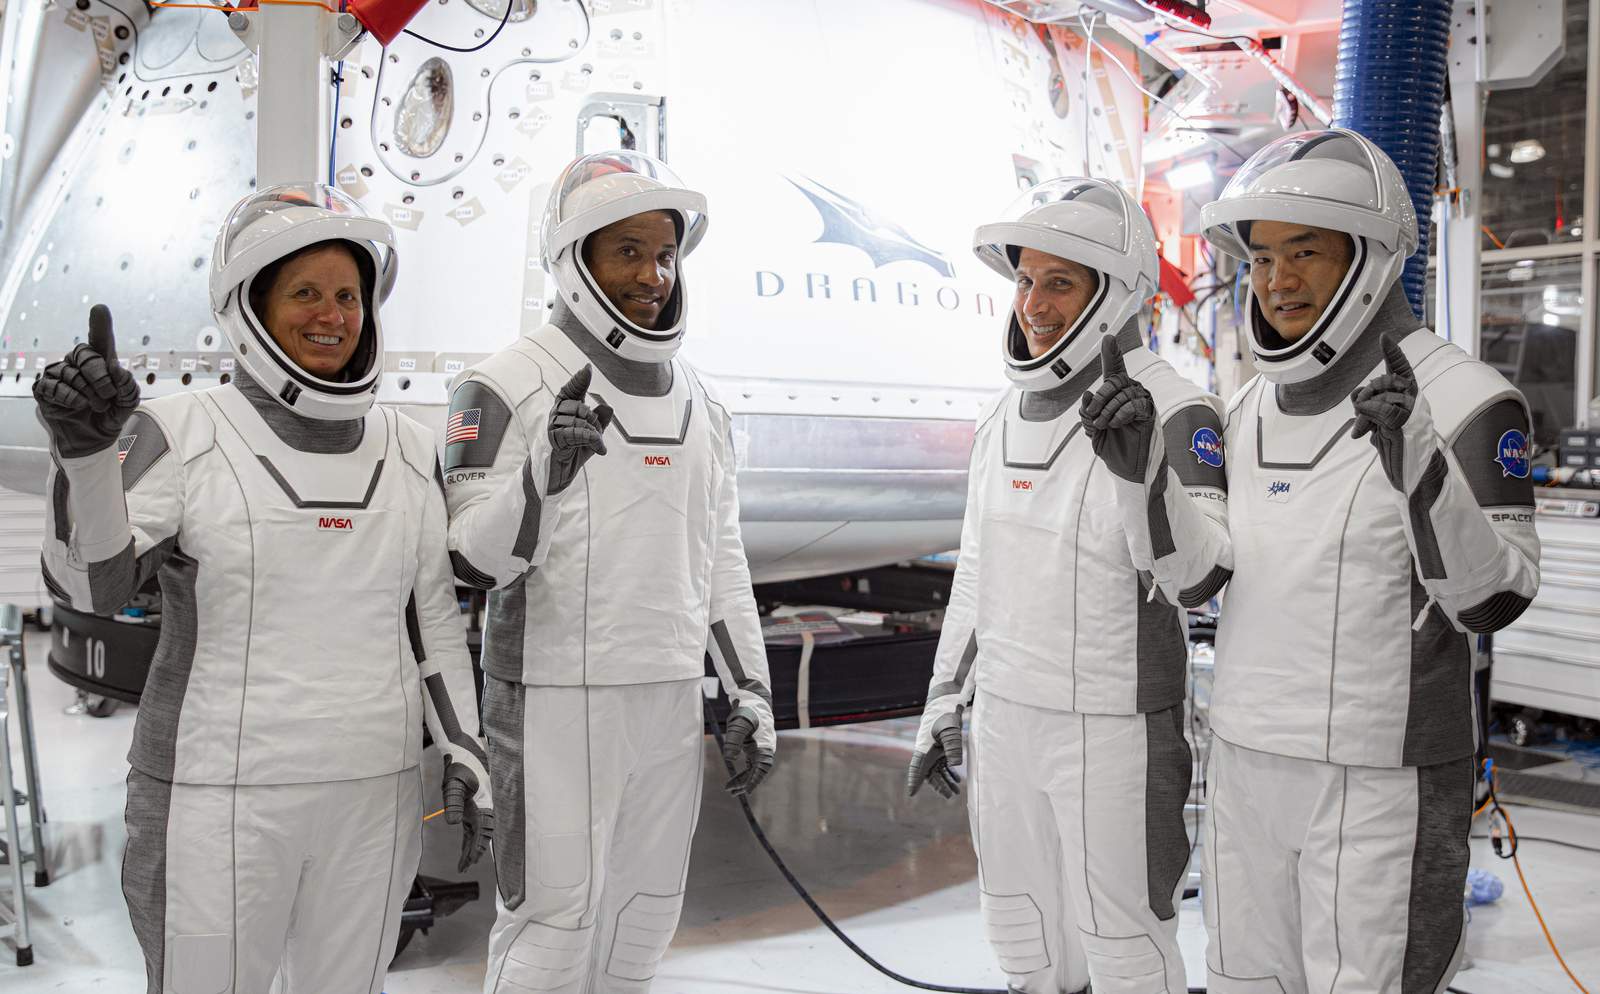 Dragon riders: Meet the next astronauts to launch from Florida with SpaceX